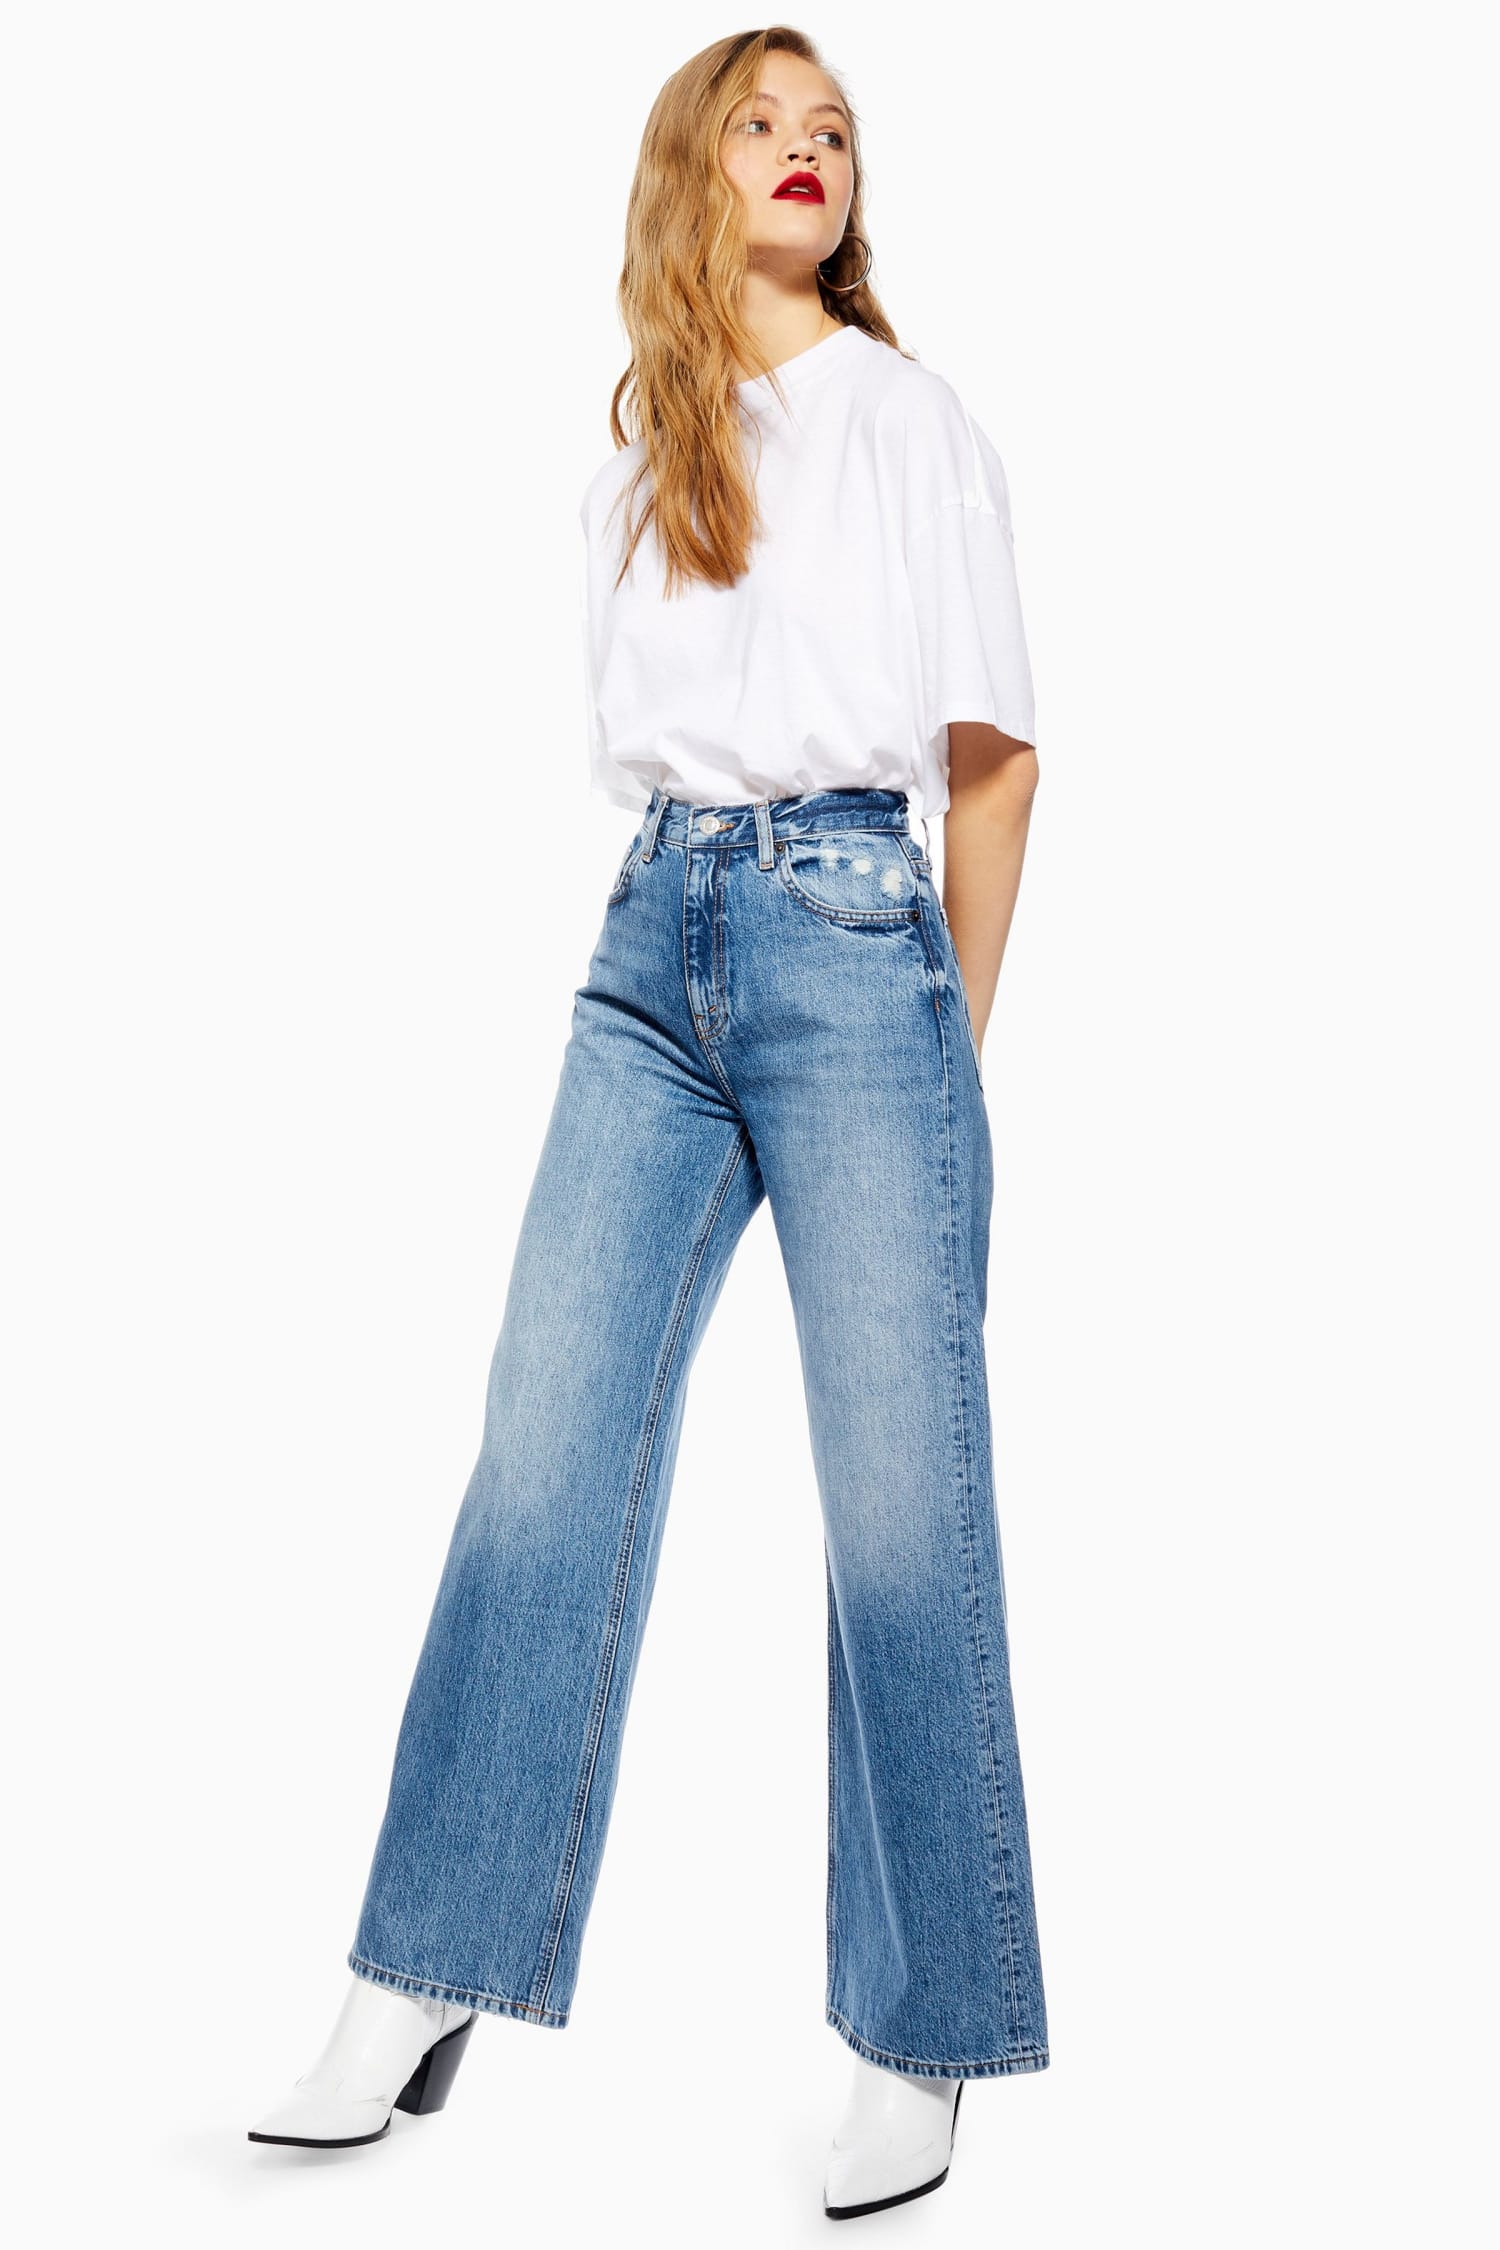 vil gøre malm tjenestemænd What style of jeans are in? The top 7 denim trends of 2020